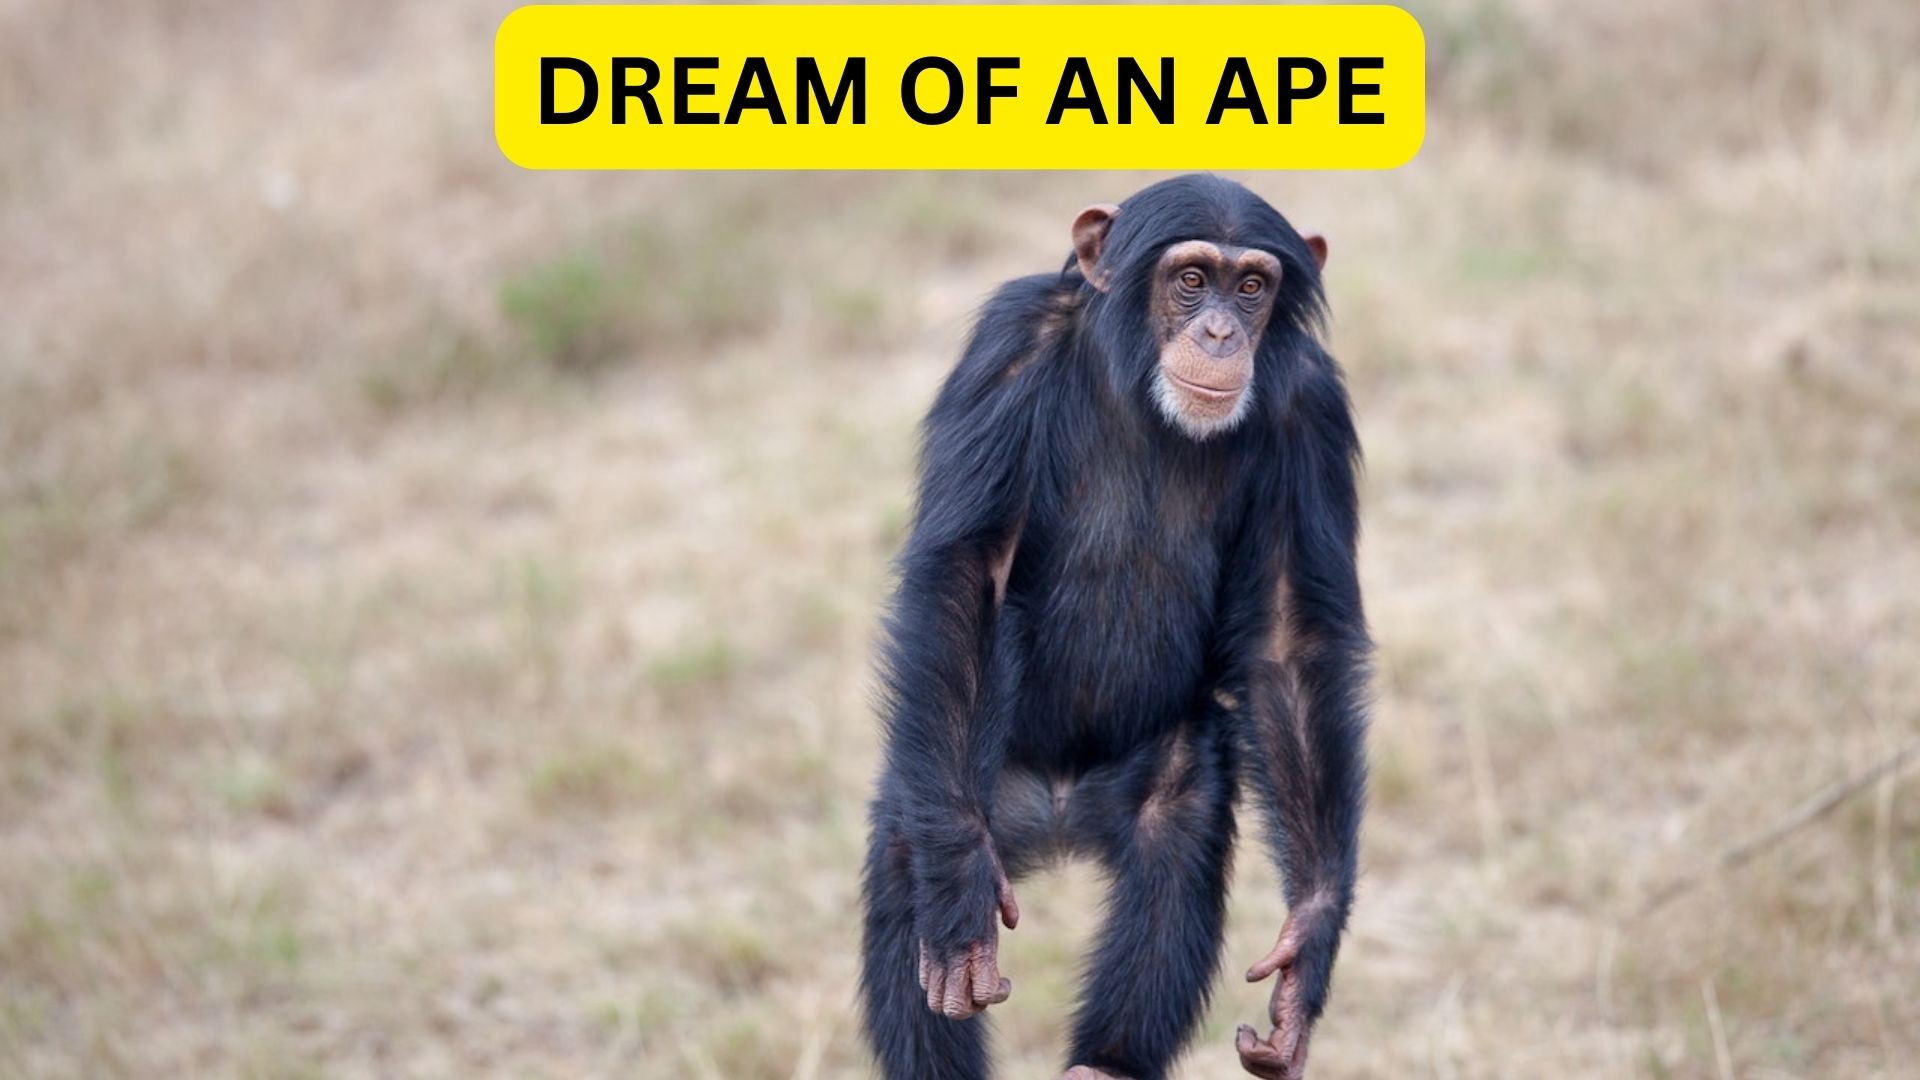 Dream Of An Ape Meaning - Good Connection With Nature And The People Around You